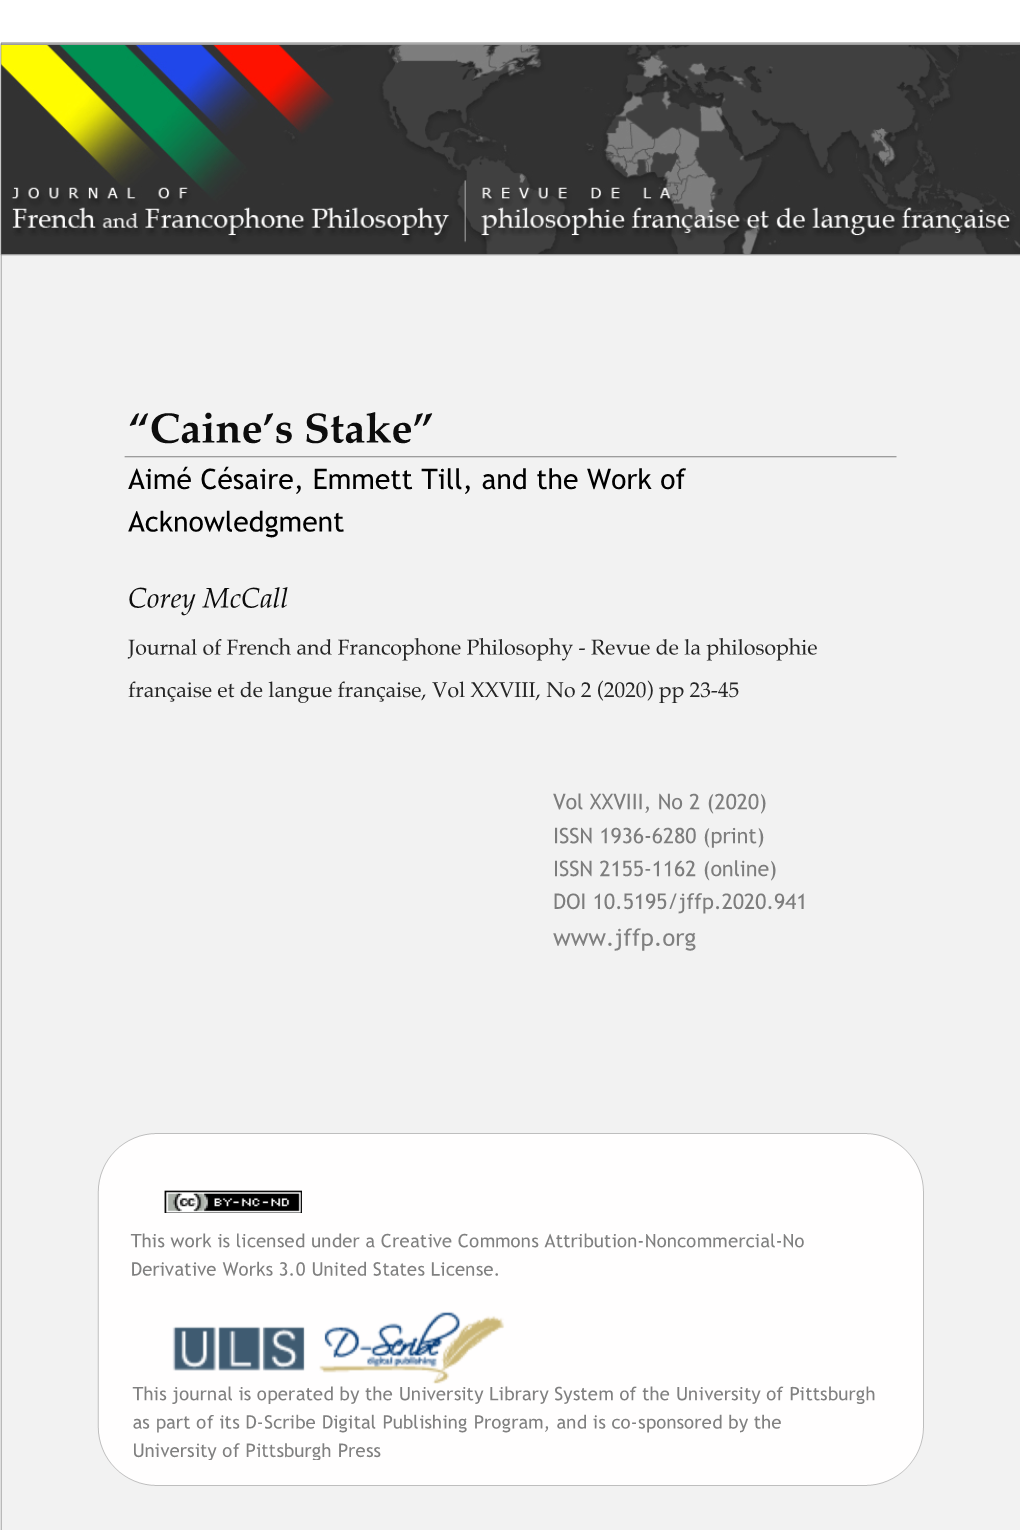 “Caine's Stake”